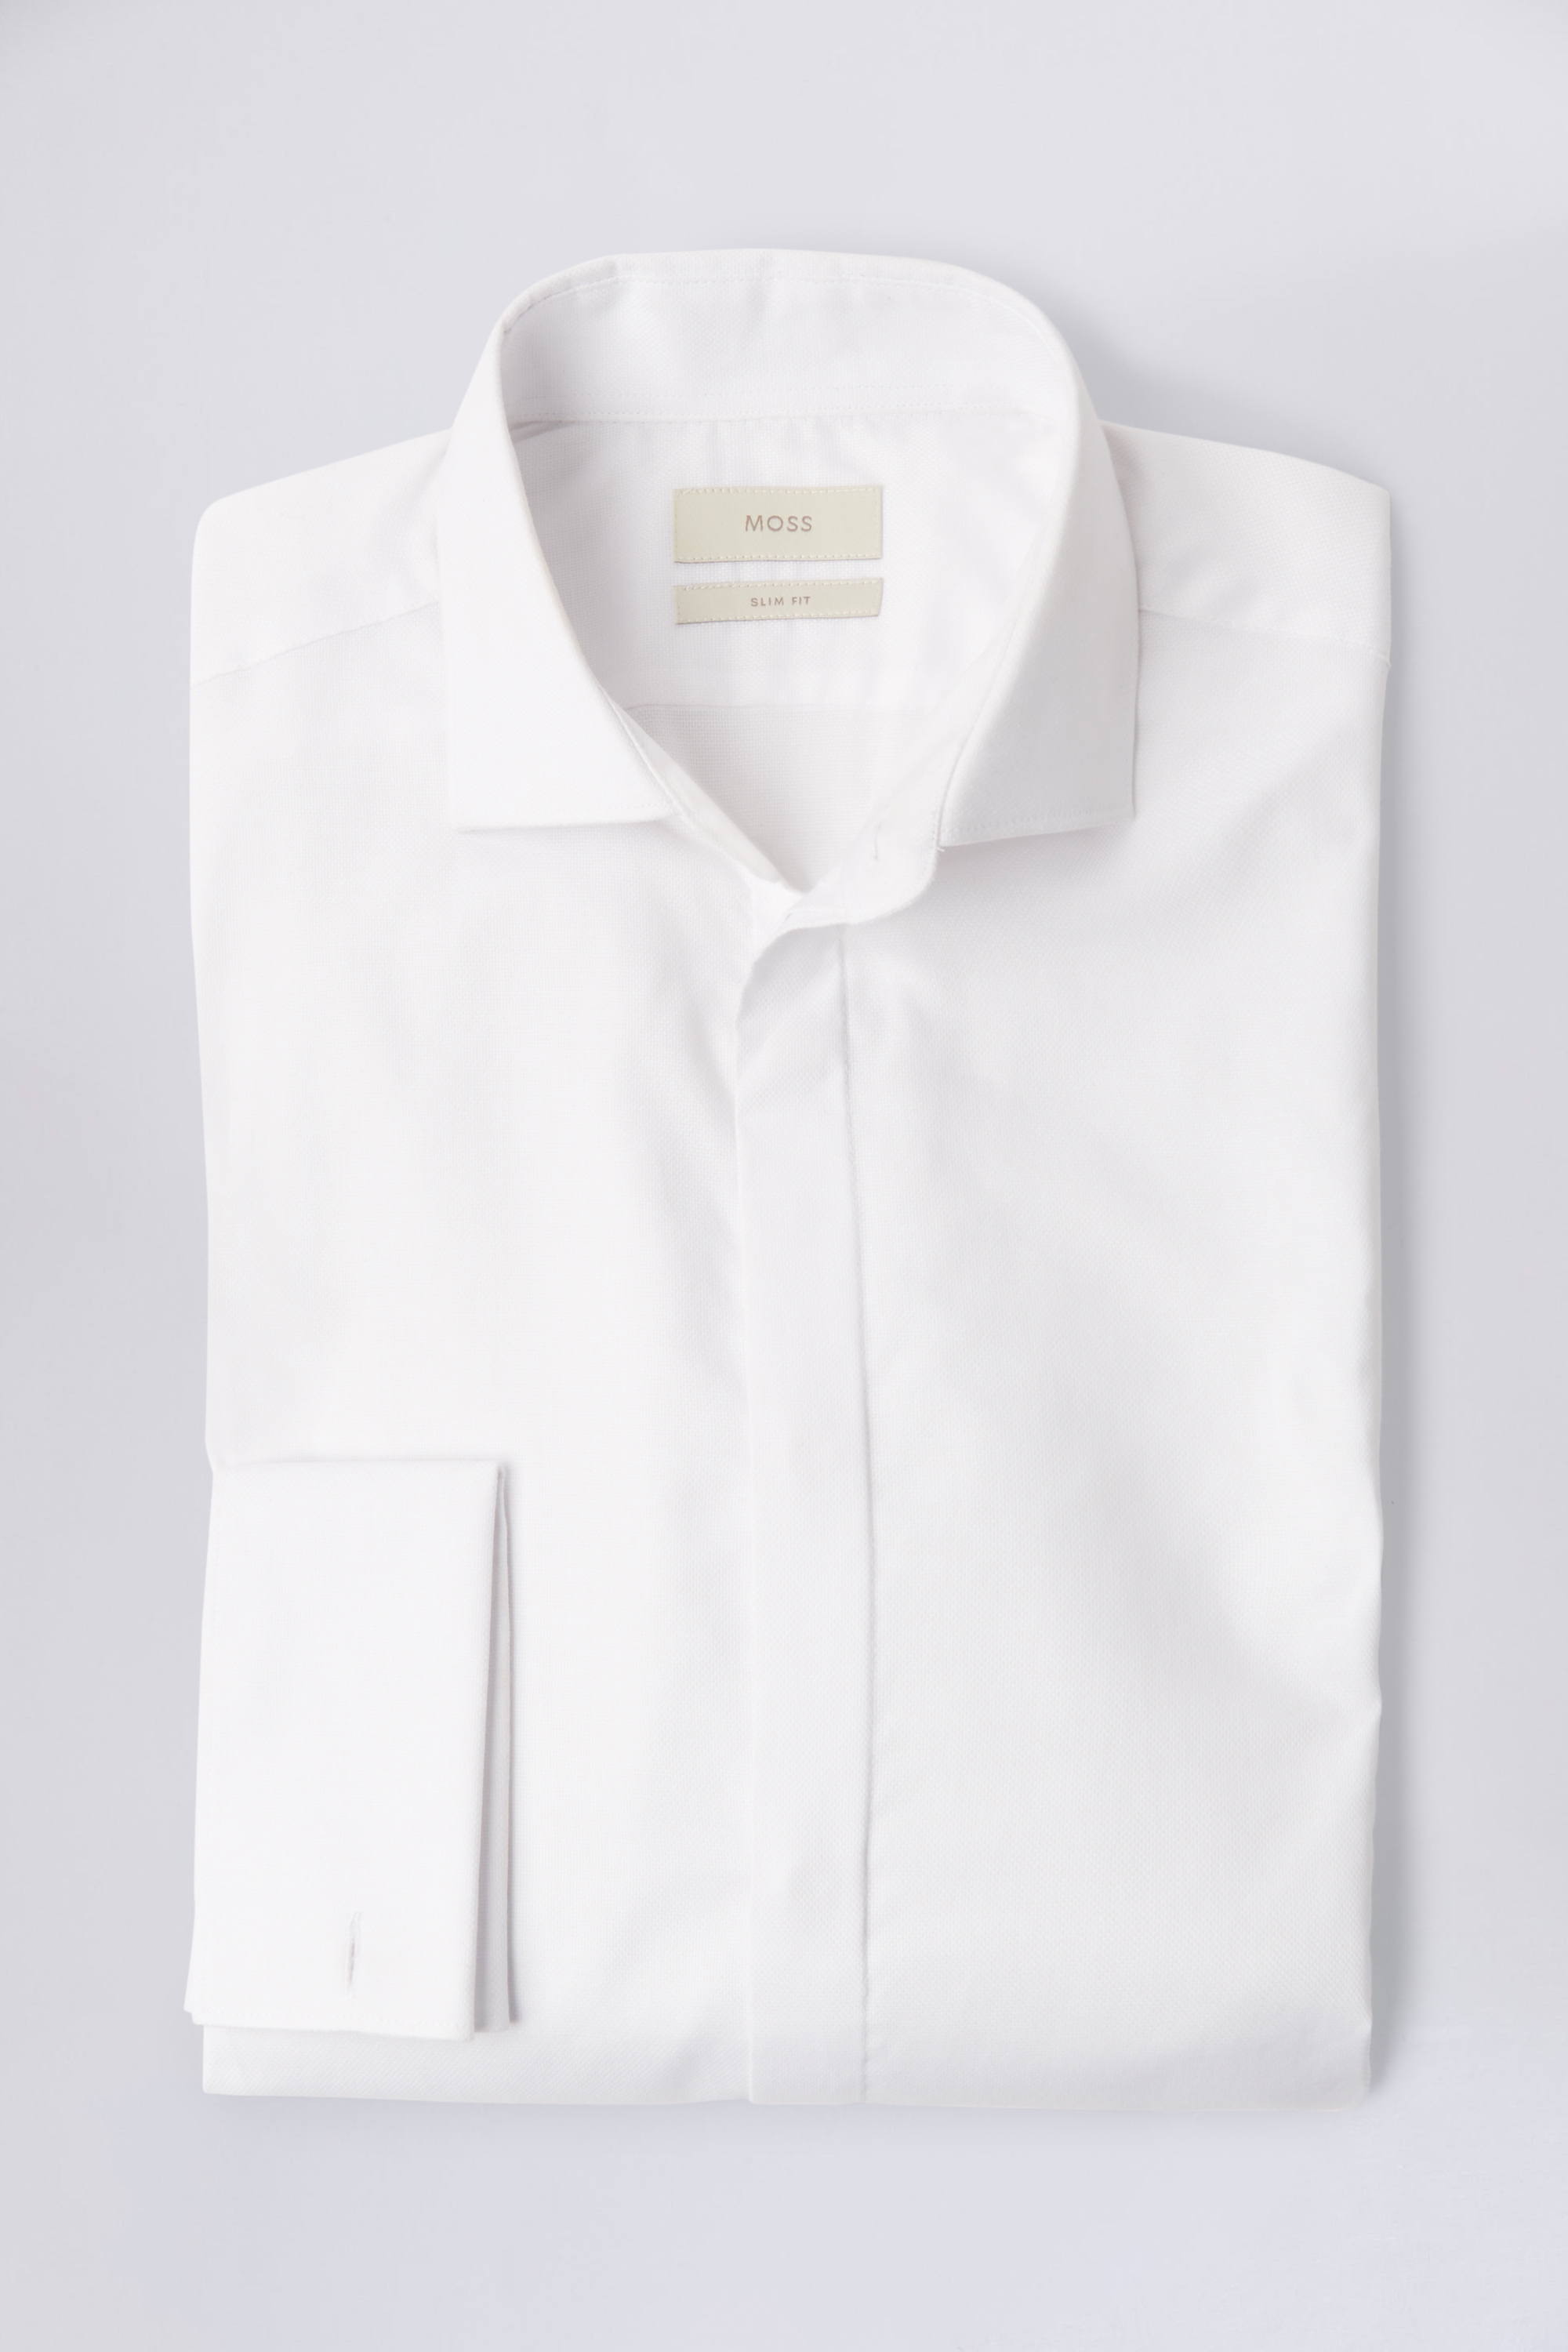 Slim Fit White Concealed Placket Dress Shirt | Buy Online at Moss